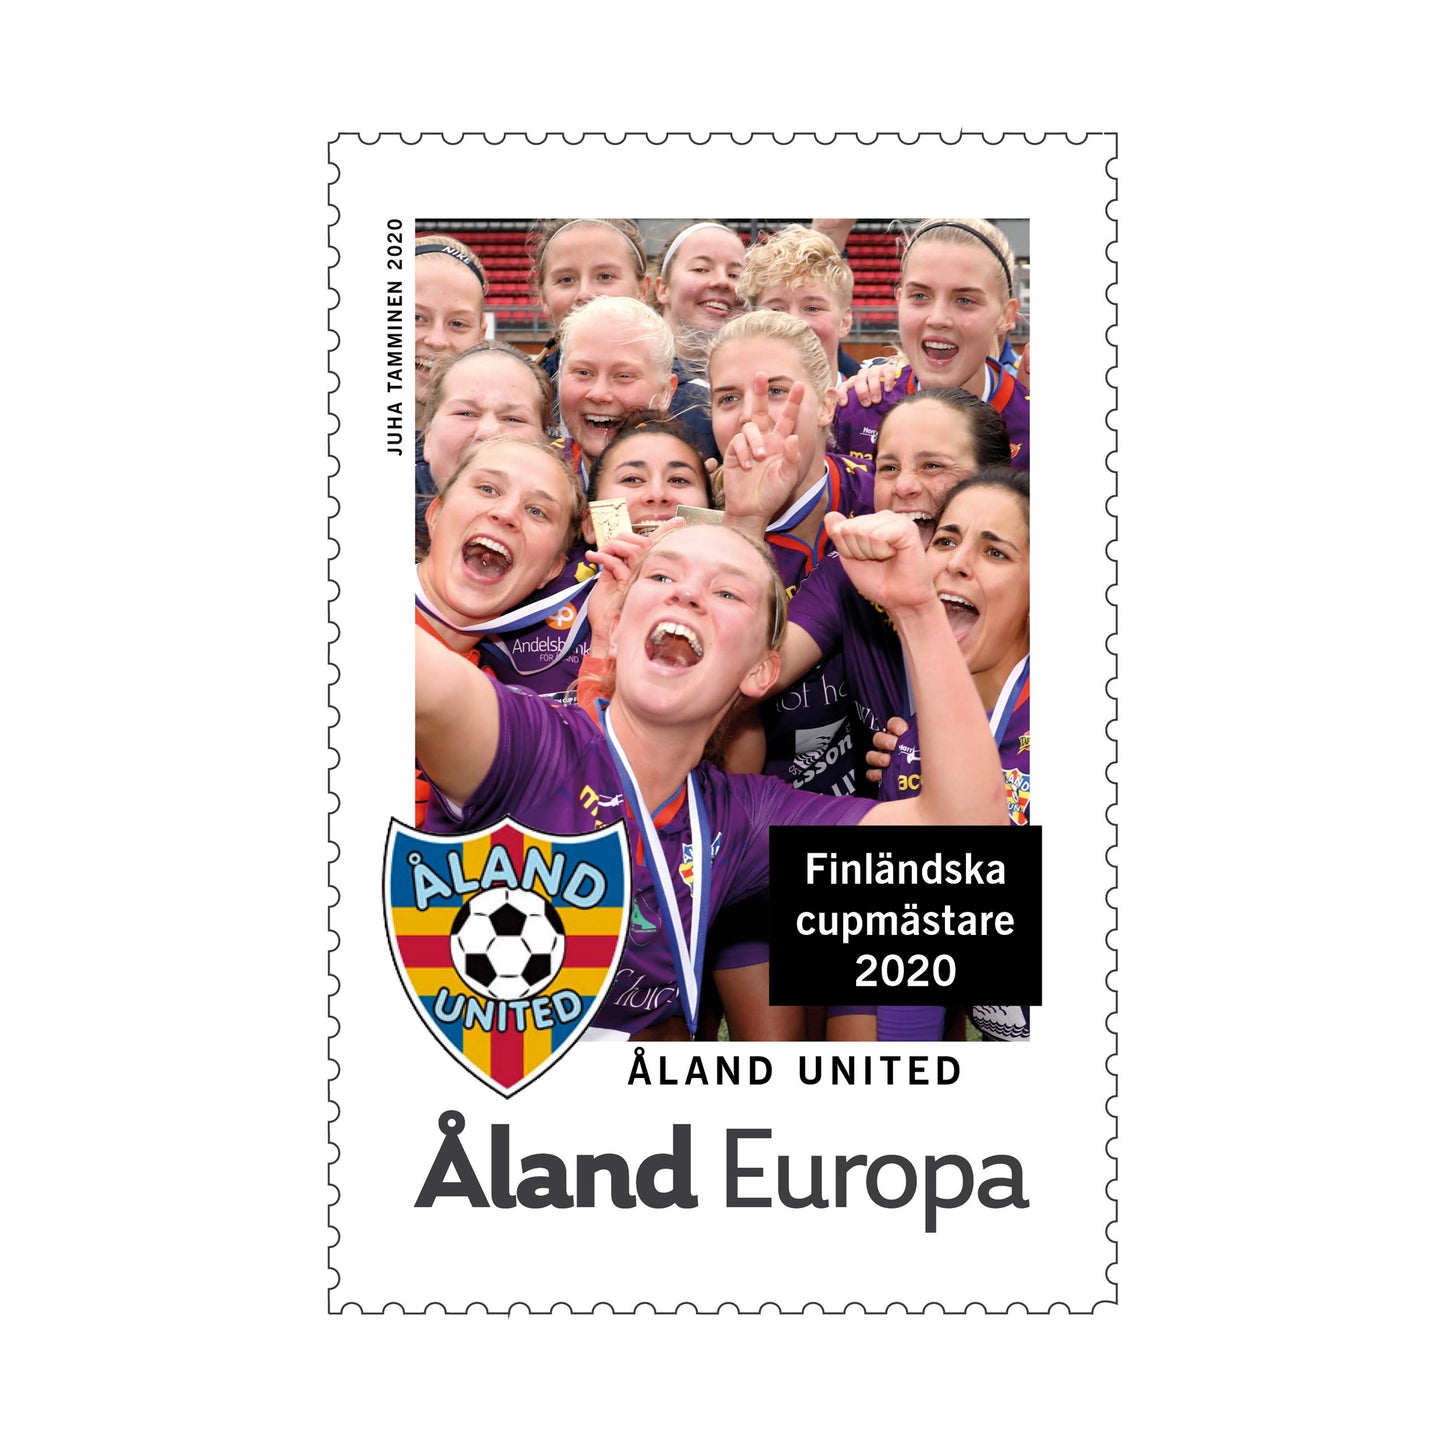 Åland United, 2020 Finnish cup champions -cancelled